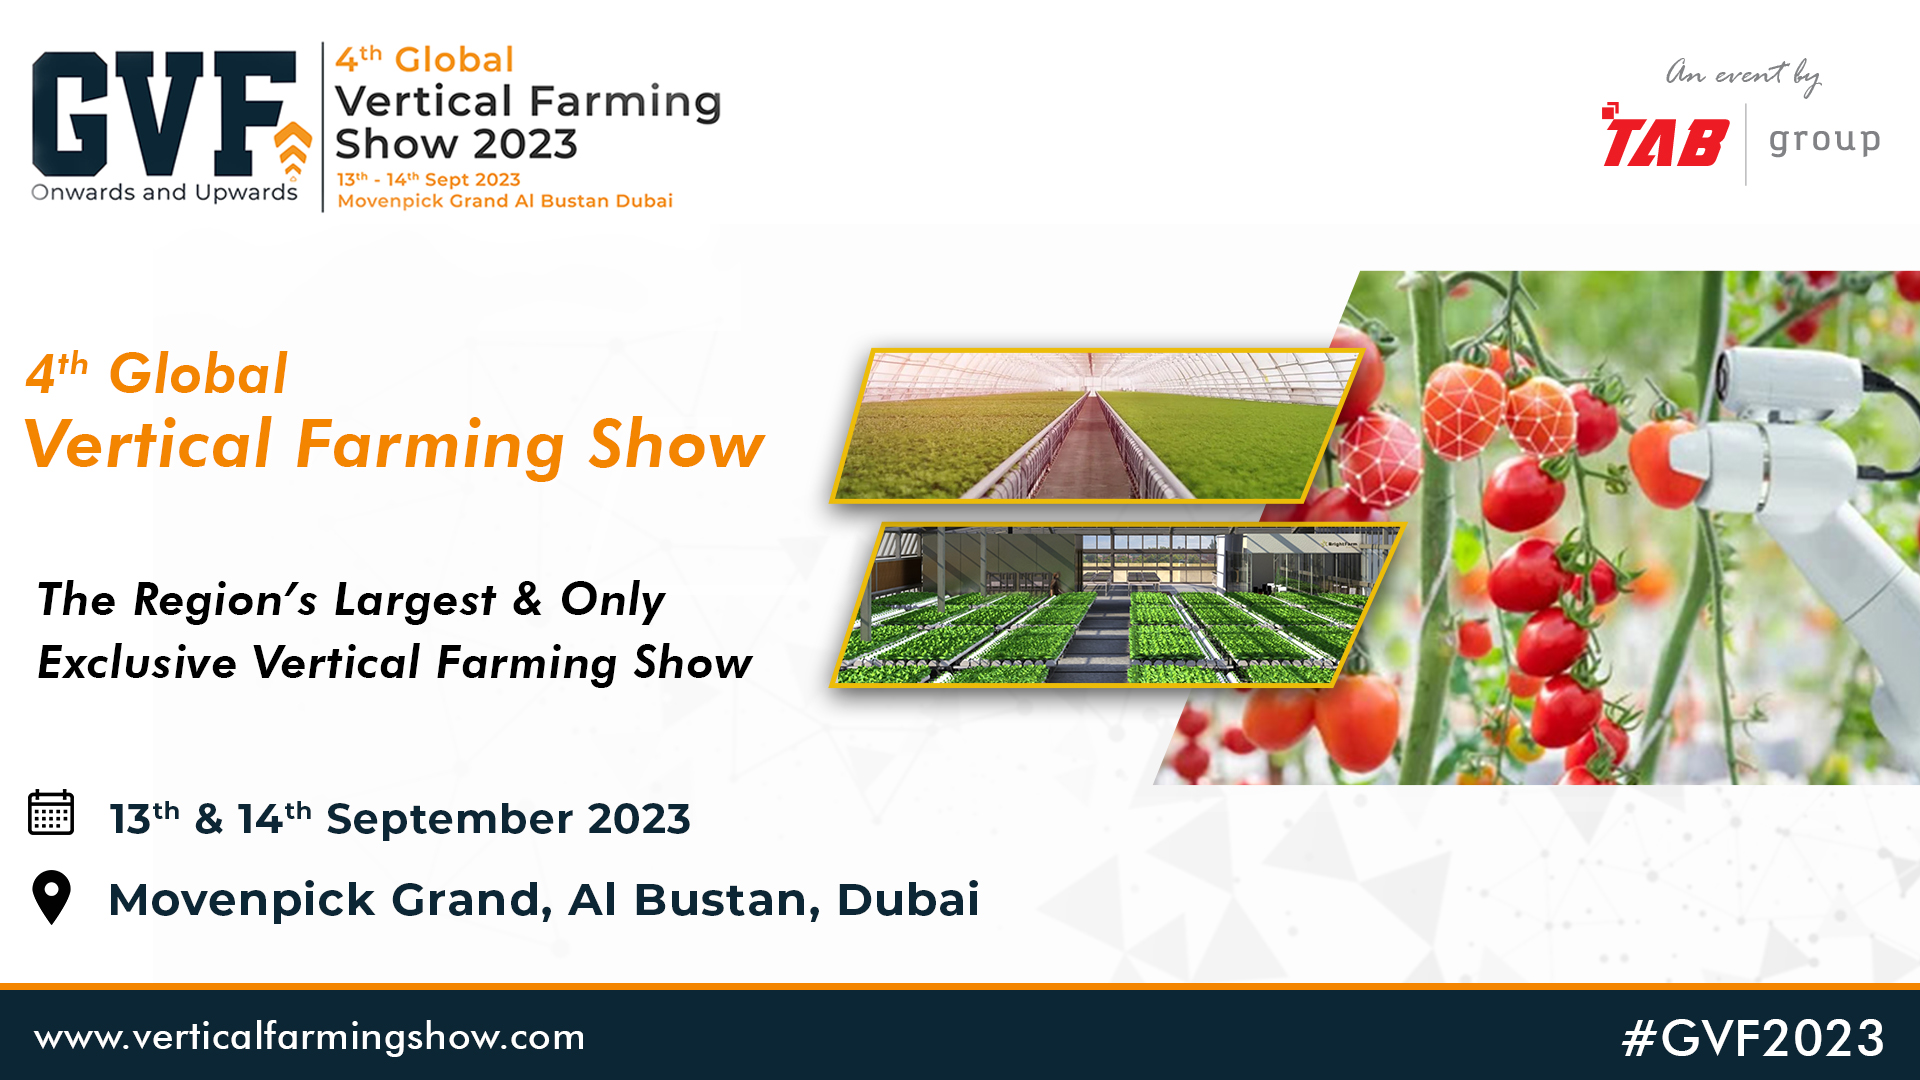 Poised to Become the Leading  Vertical Farming Show in the Middle East, GVF 2023 is Gearing Up Exceptionally